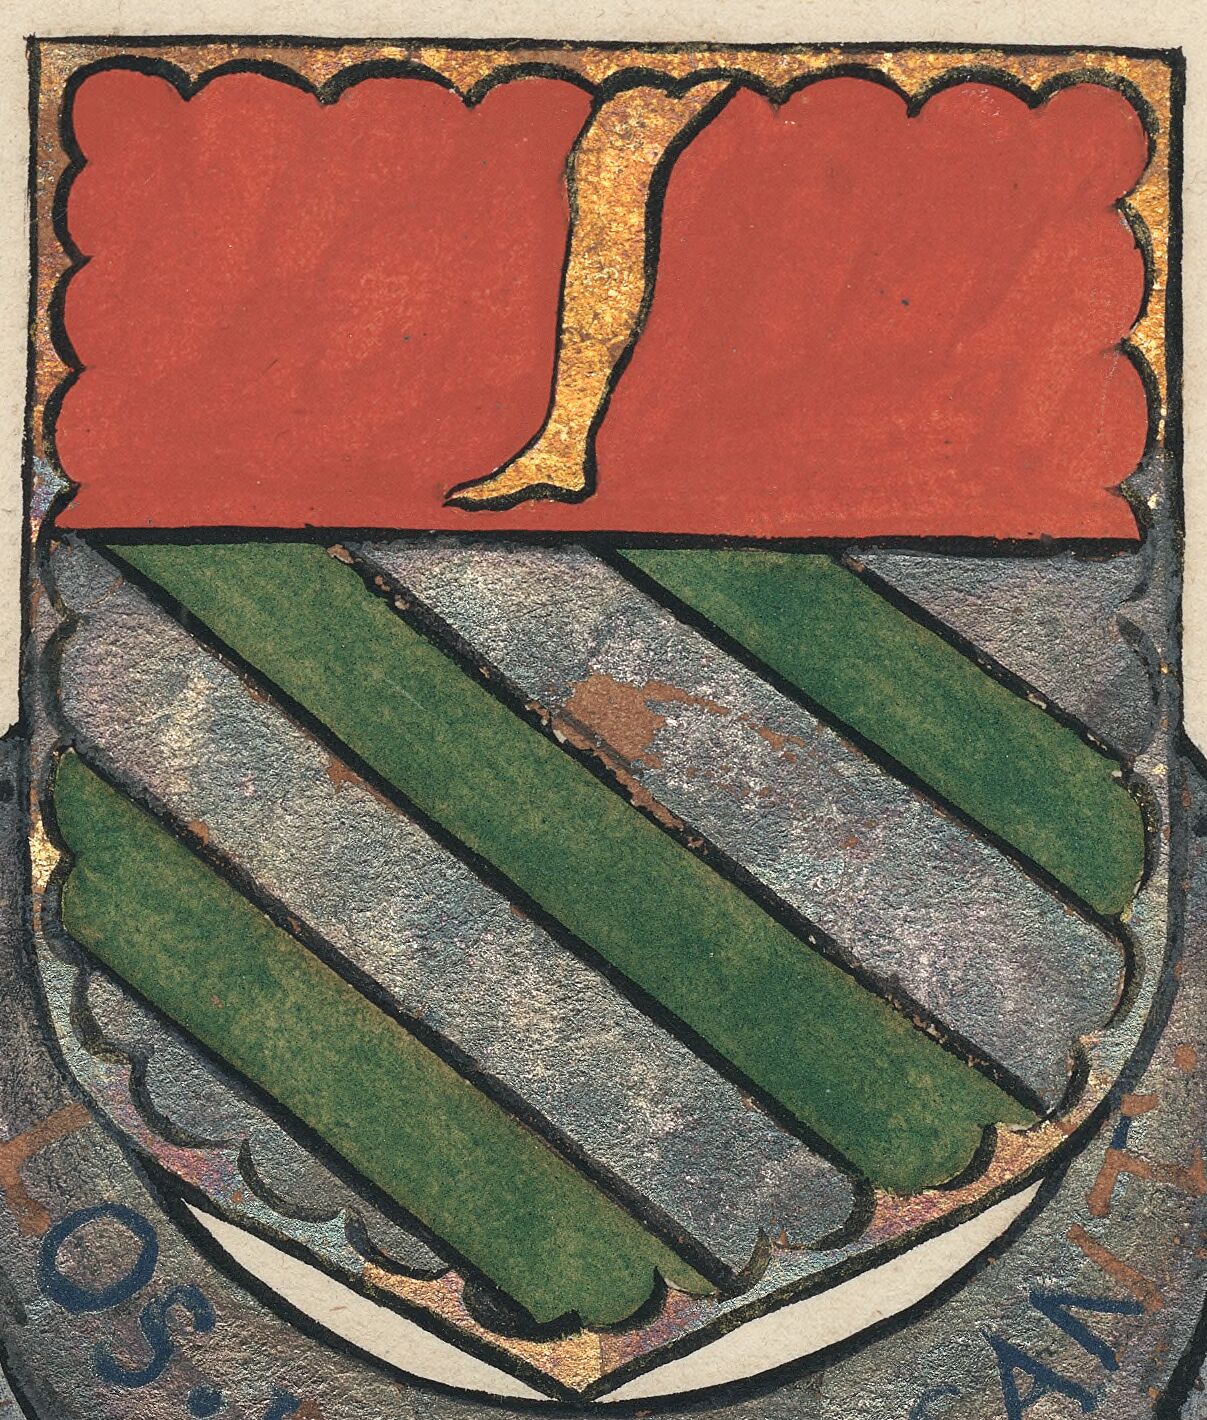 Coat of … arms?